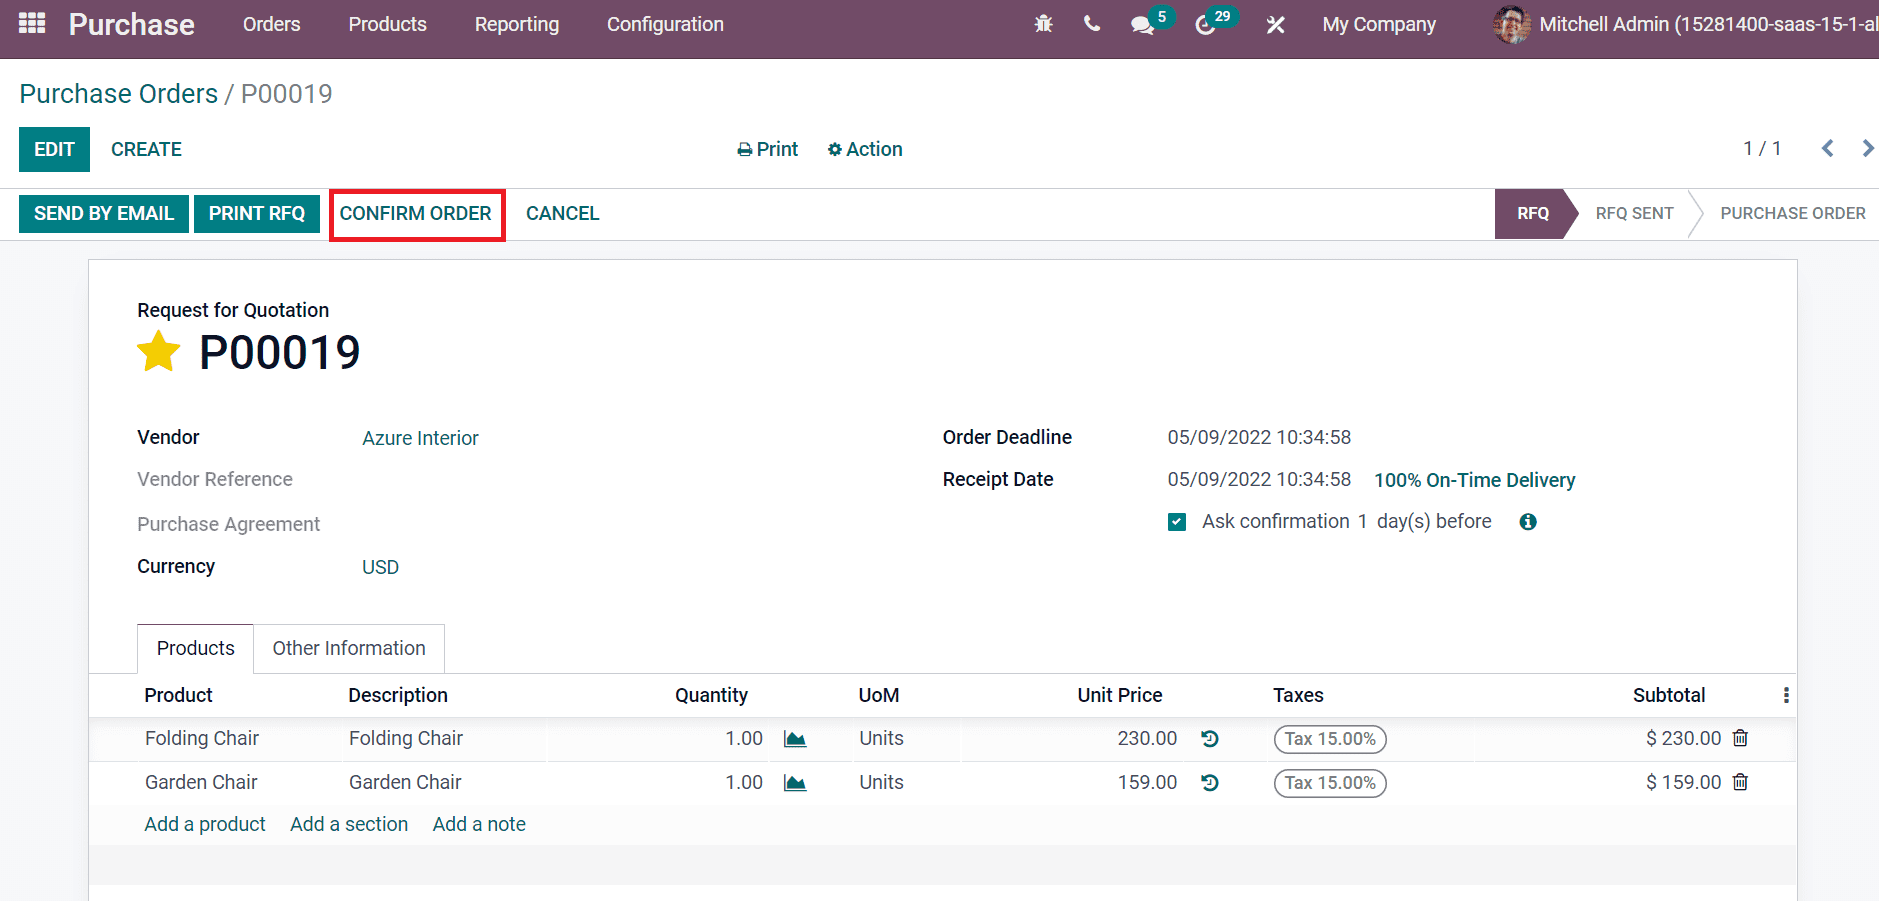 how-to-configure-landed-cost-in-odoo-15-inventory-module-cybrosys